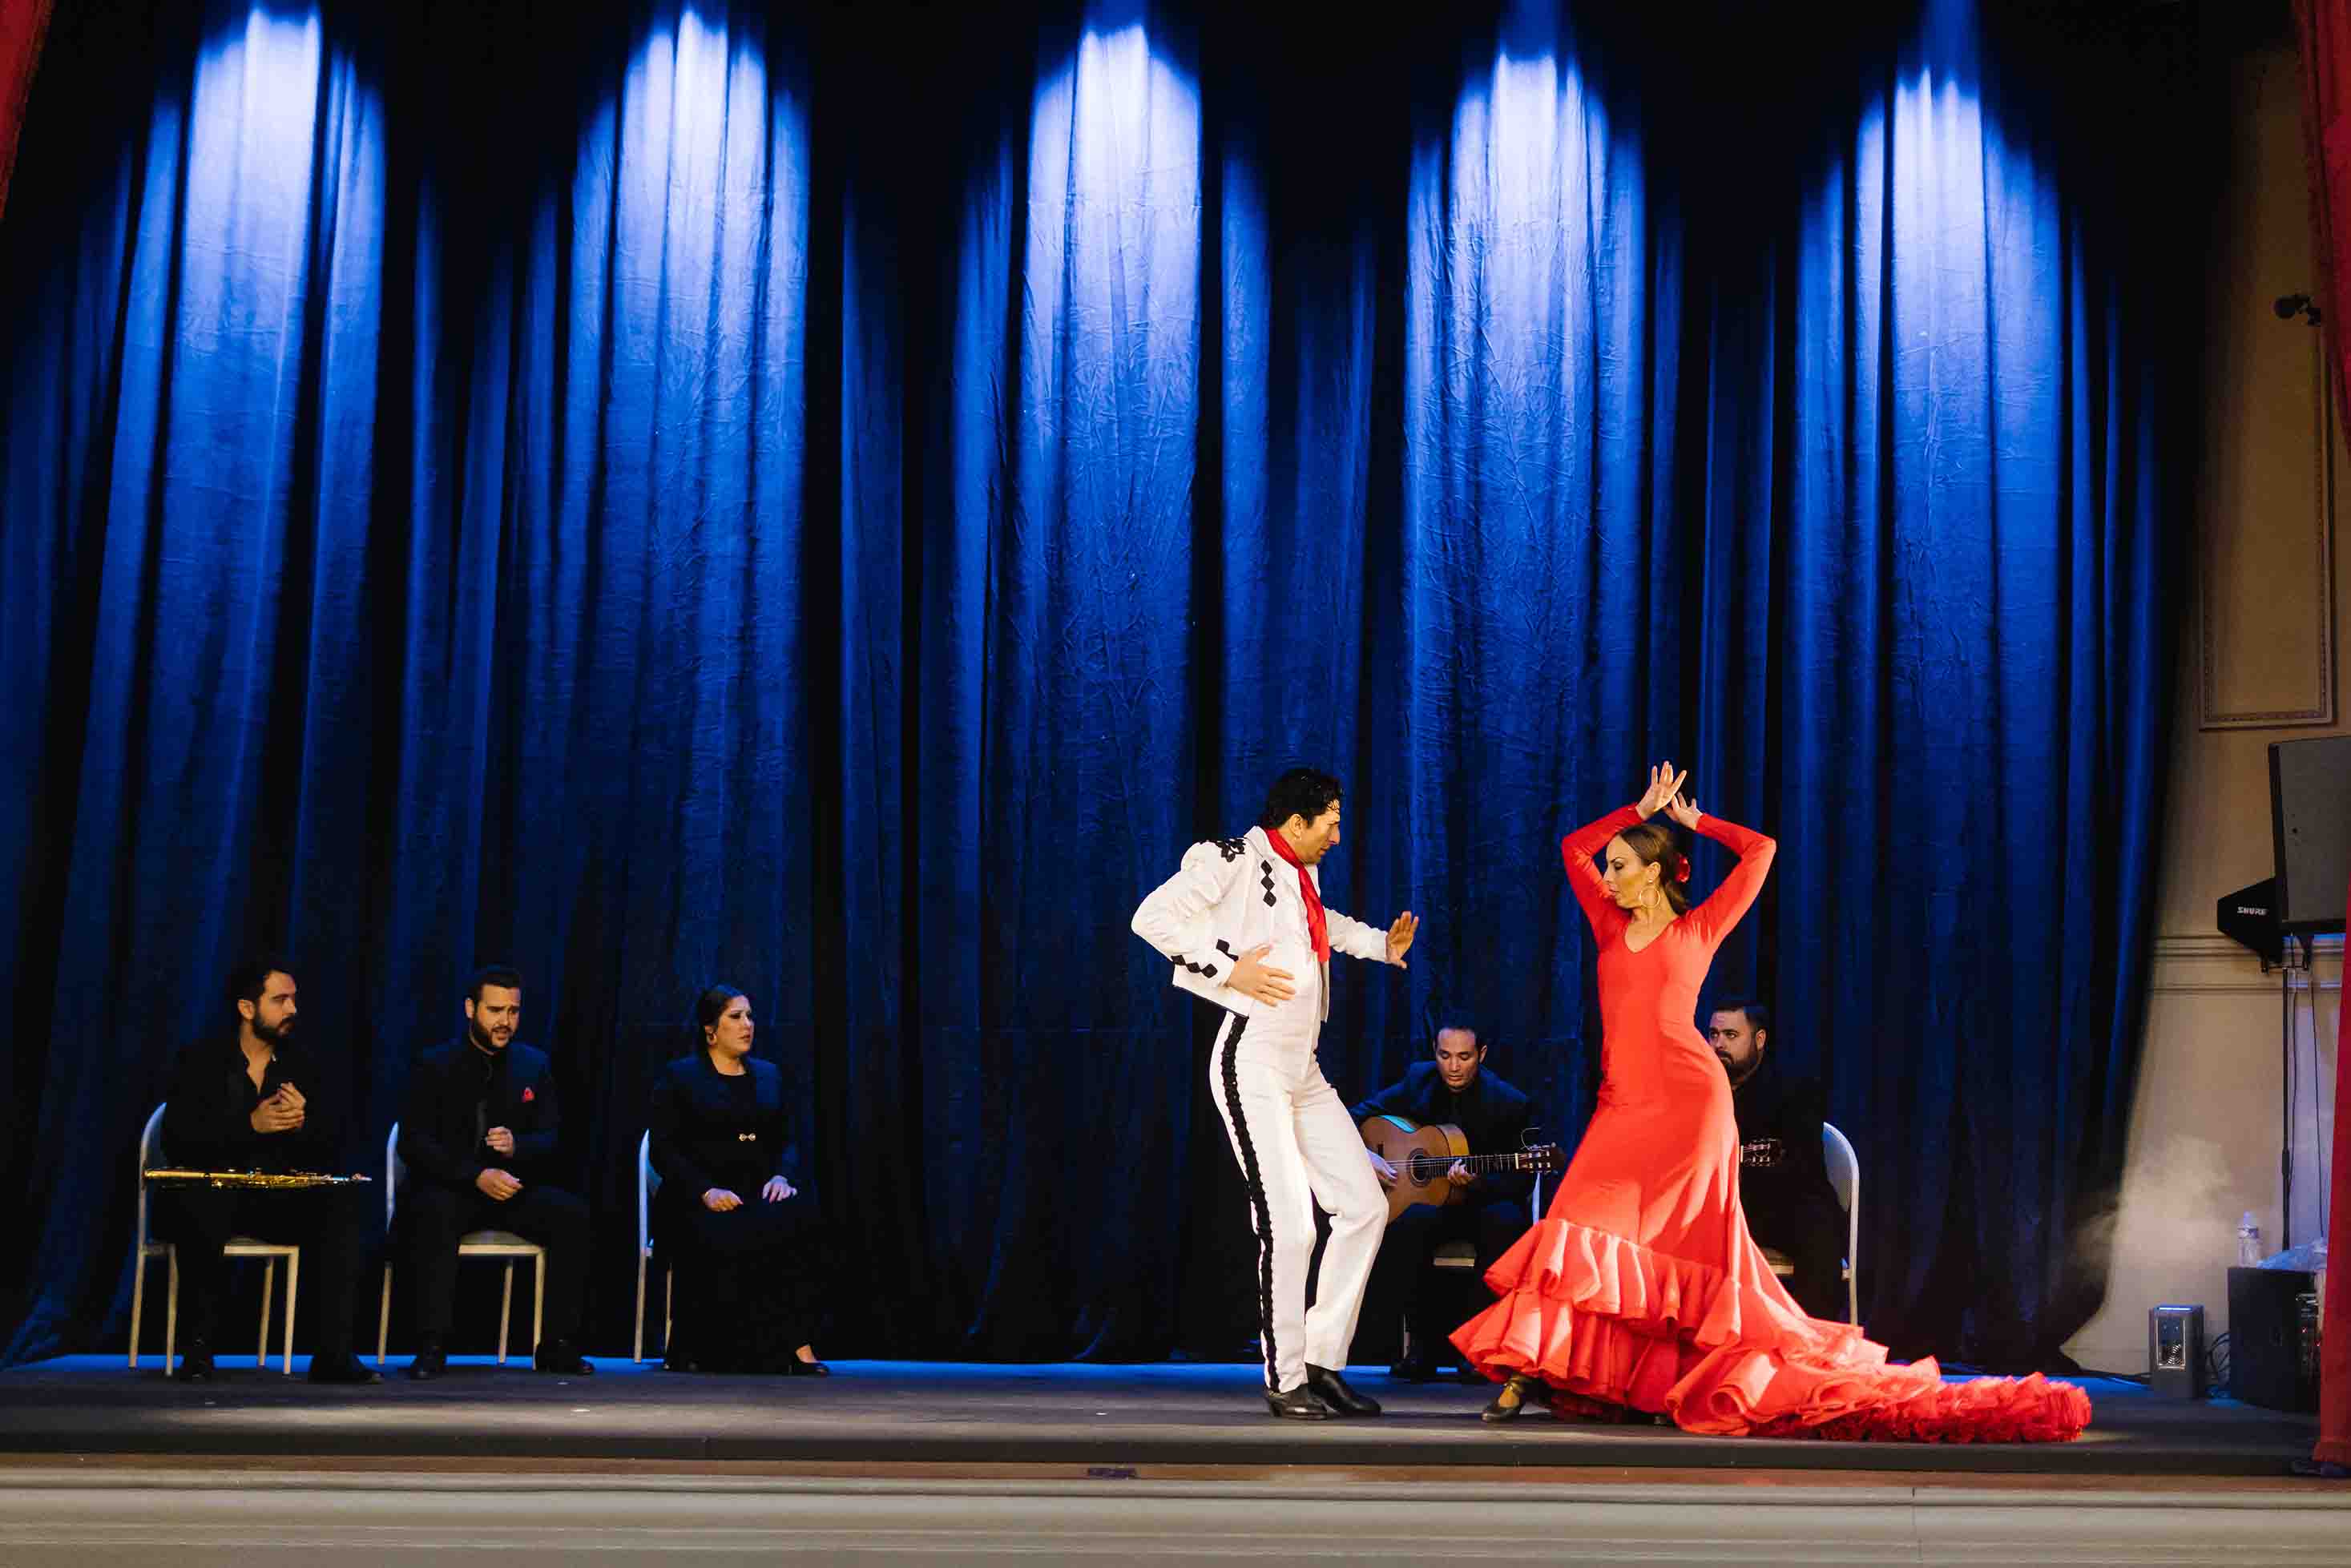 A man dancing flamenco at the Authentic Flamenco show in NYC - Authentic Flamenco in Manchester: A Traditional Spanish Show